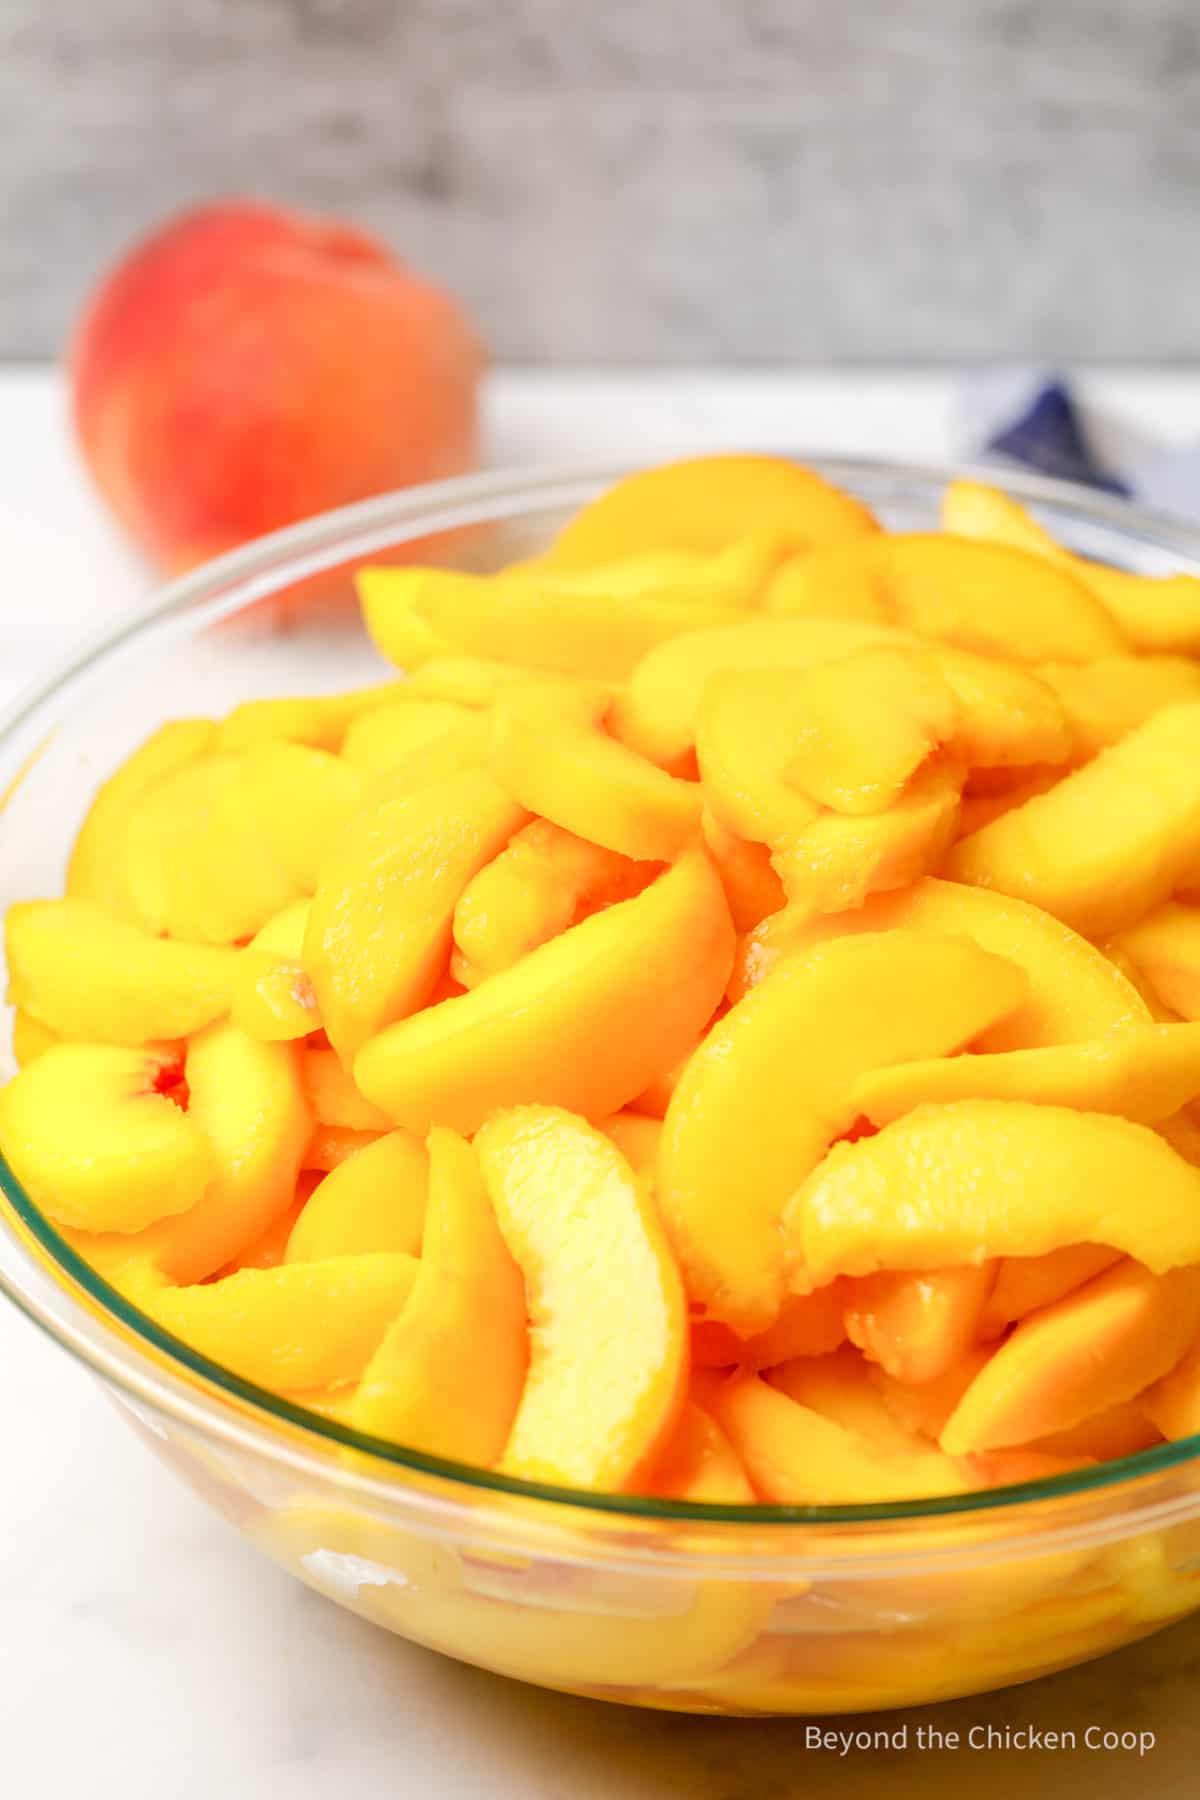 A large glass bowl filled with sliced peaches.